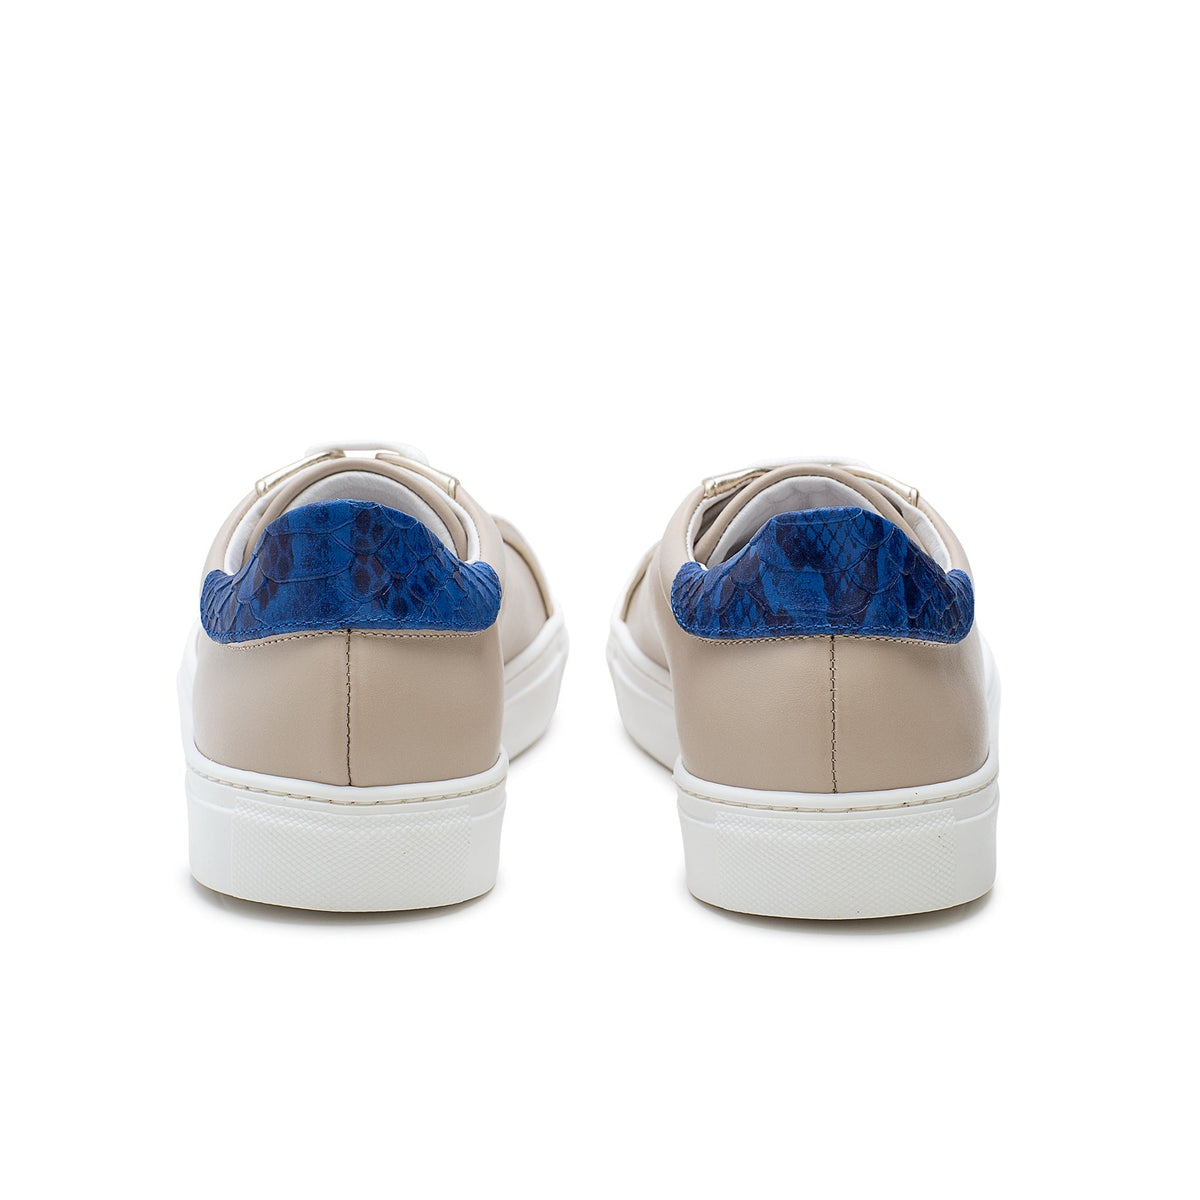 Sorrento- platinum and blue sneaker Sneakers Cammino Shoes 